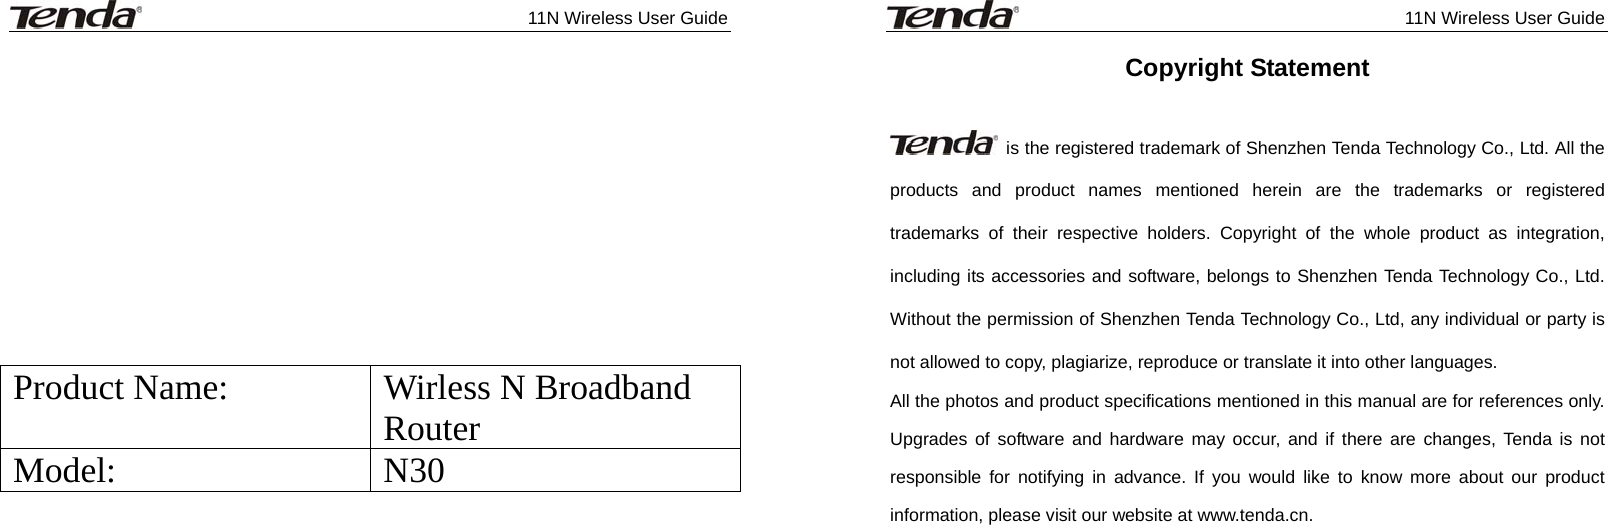              11N Wireless User Guide              Product Name:  Wirless N Broadband Router  Model: N30              11N Wireless User Guide  Copyright Statement    is the registered trademark of Shenzhen Tenda Technology Co., Ltd. All the products and product names mentioned herein are the trademarks or registered trademarks of their respective holders. Copyright of the whole product as integration, including its accessories and software, belongs to Shenzhen Tenda Technology Co., Ltd. Without the permission of Shenzhen Tenda Technology Co., Ltd, any individual or party is not allowed to copy, plagiarize, reproduce or translate it into other languages. All the photos and product specifications mentioned in this manual are for references only. Upgrades of software and hardware may occur, and if there are changes, Tenda is not responsible for notifying in advance. If you would like to know more about our product information, please visit our website at www.tenda.cn.    